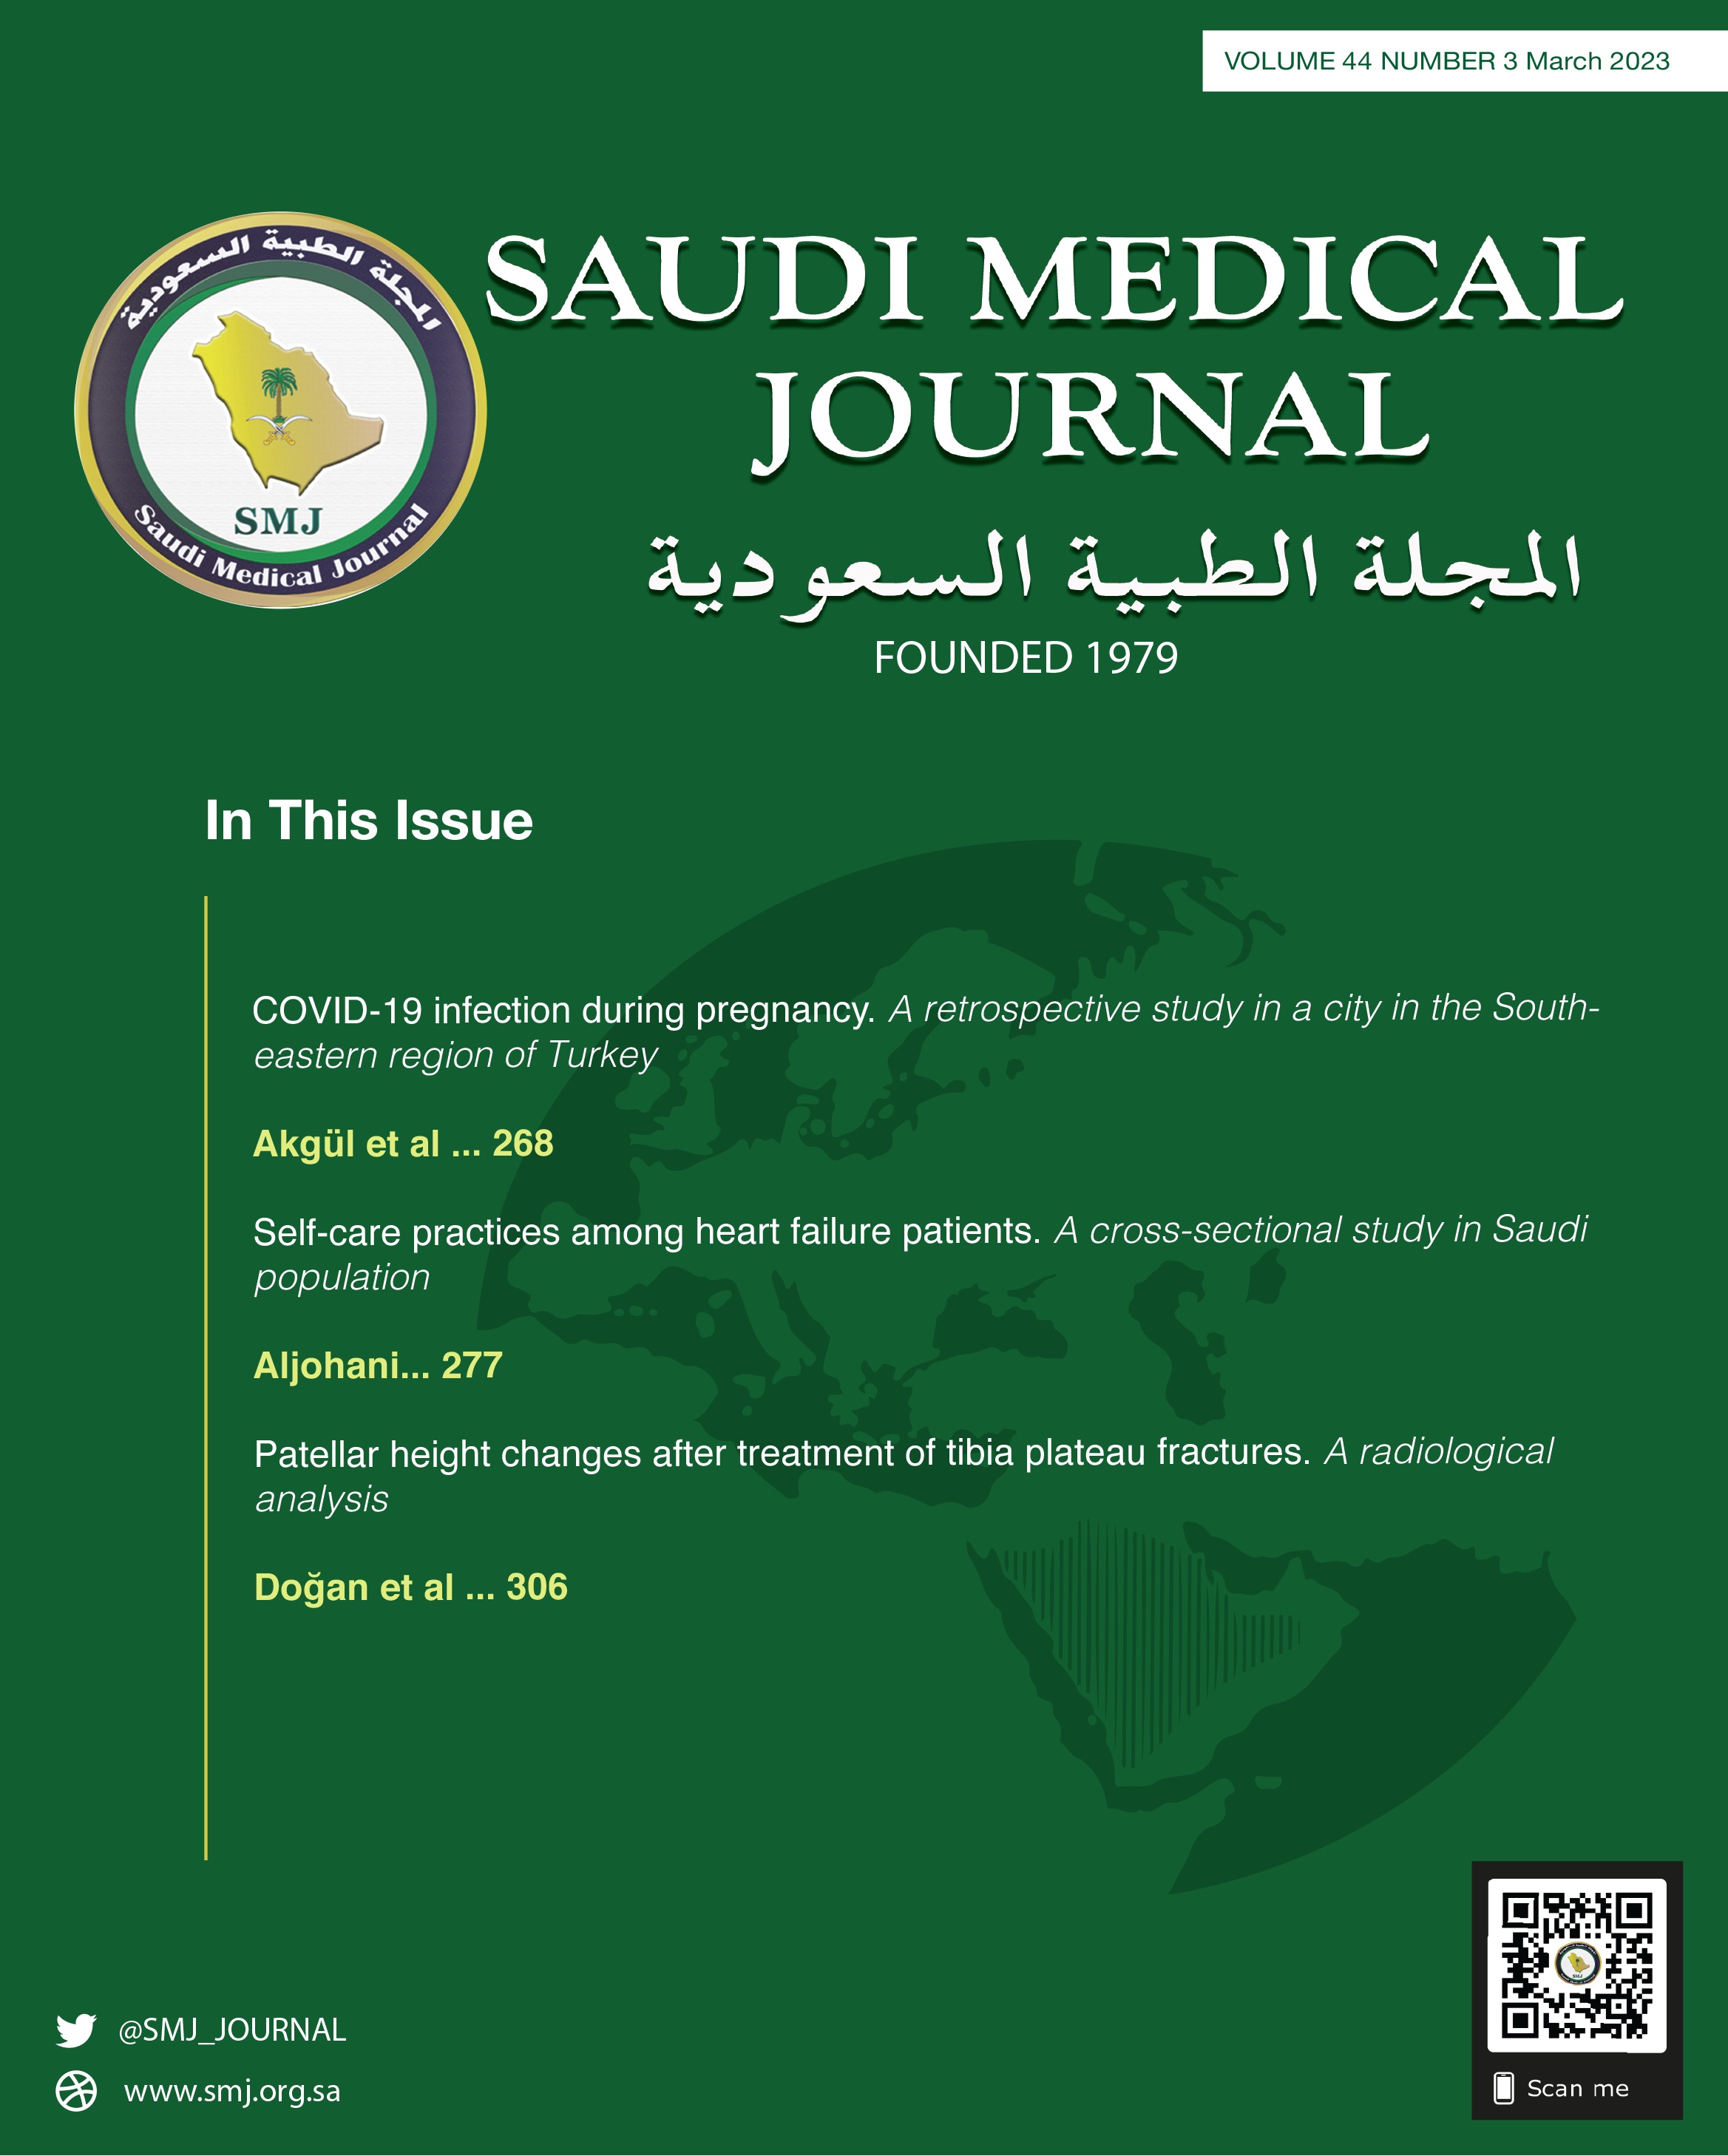 Phenotypical evaluation of lymphocytes and monocytes in patients with type 2 diabetes mellitus in Saudi Arabia